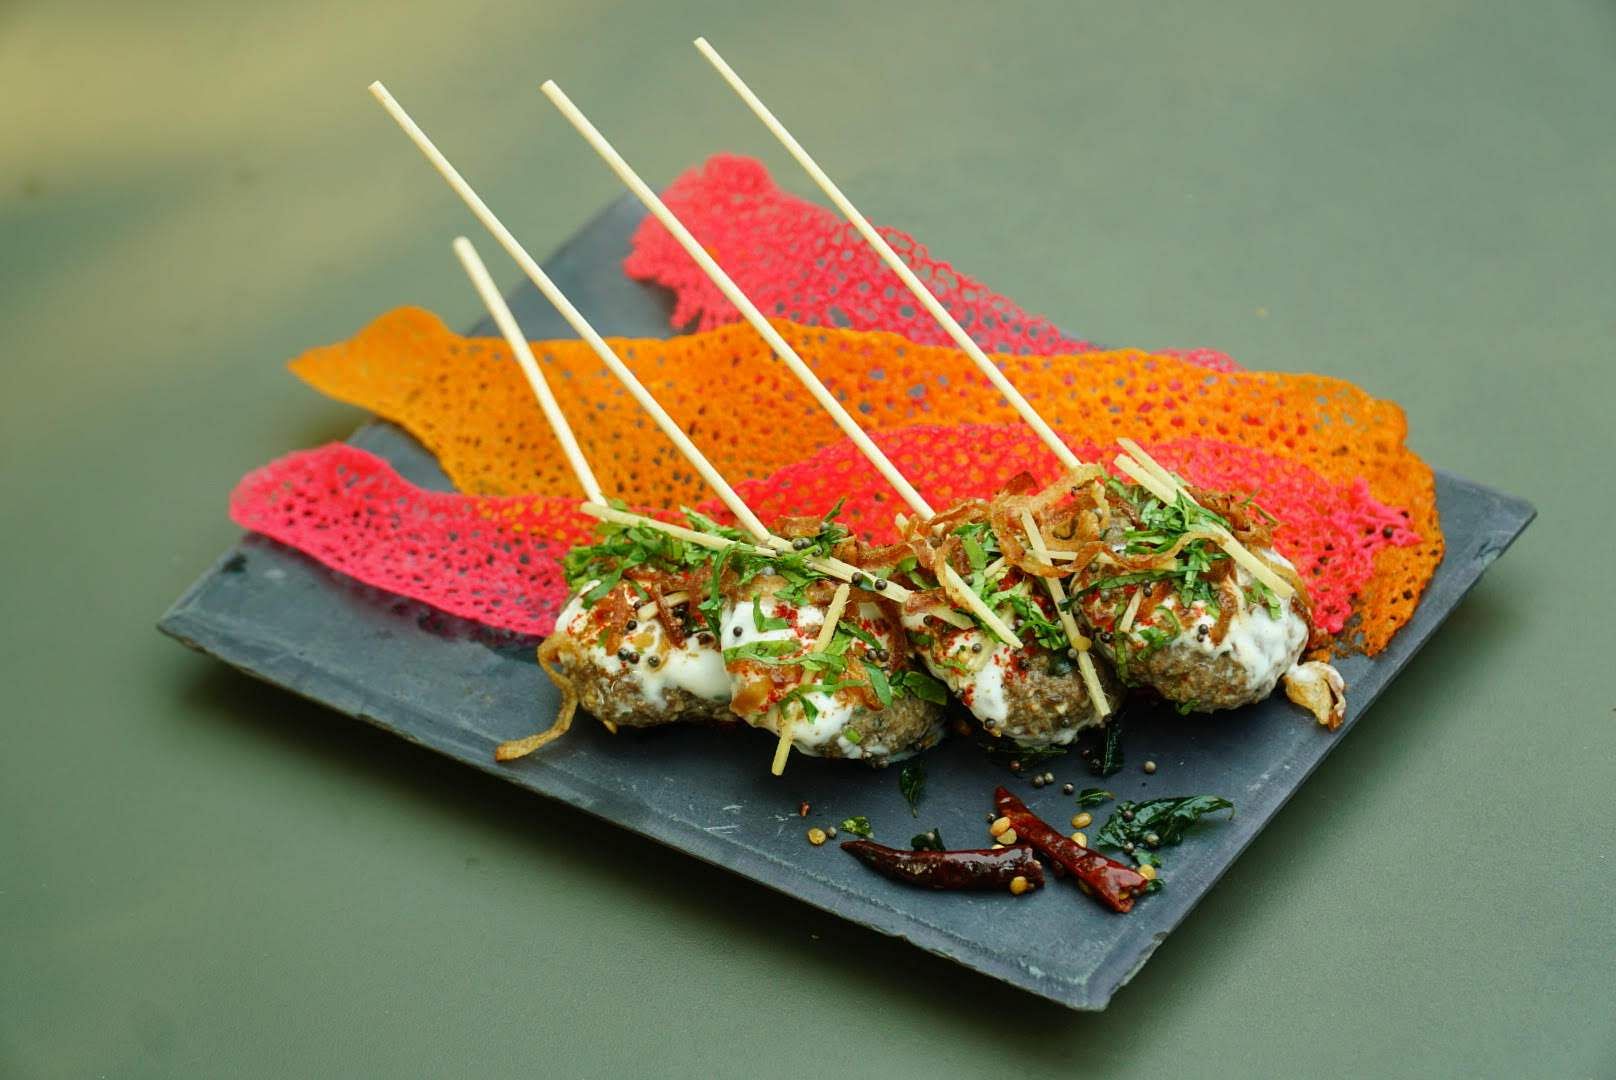 Check out two recipies exclusively created by Chef Ashutosh Awasthi of The Park Kolkata